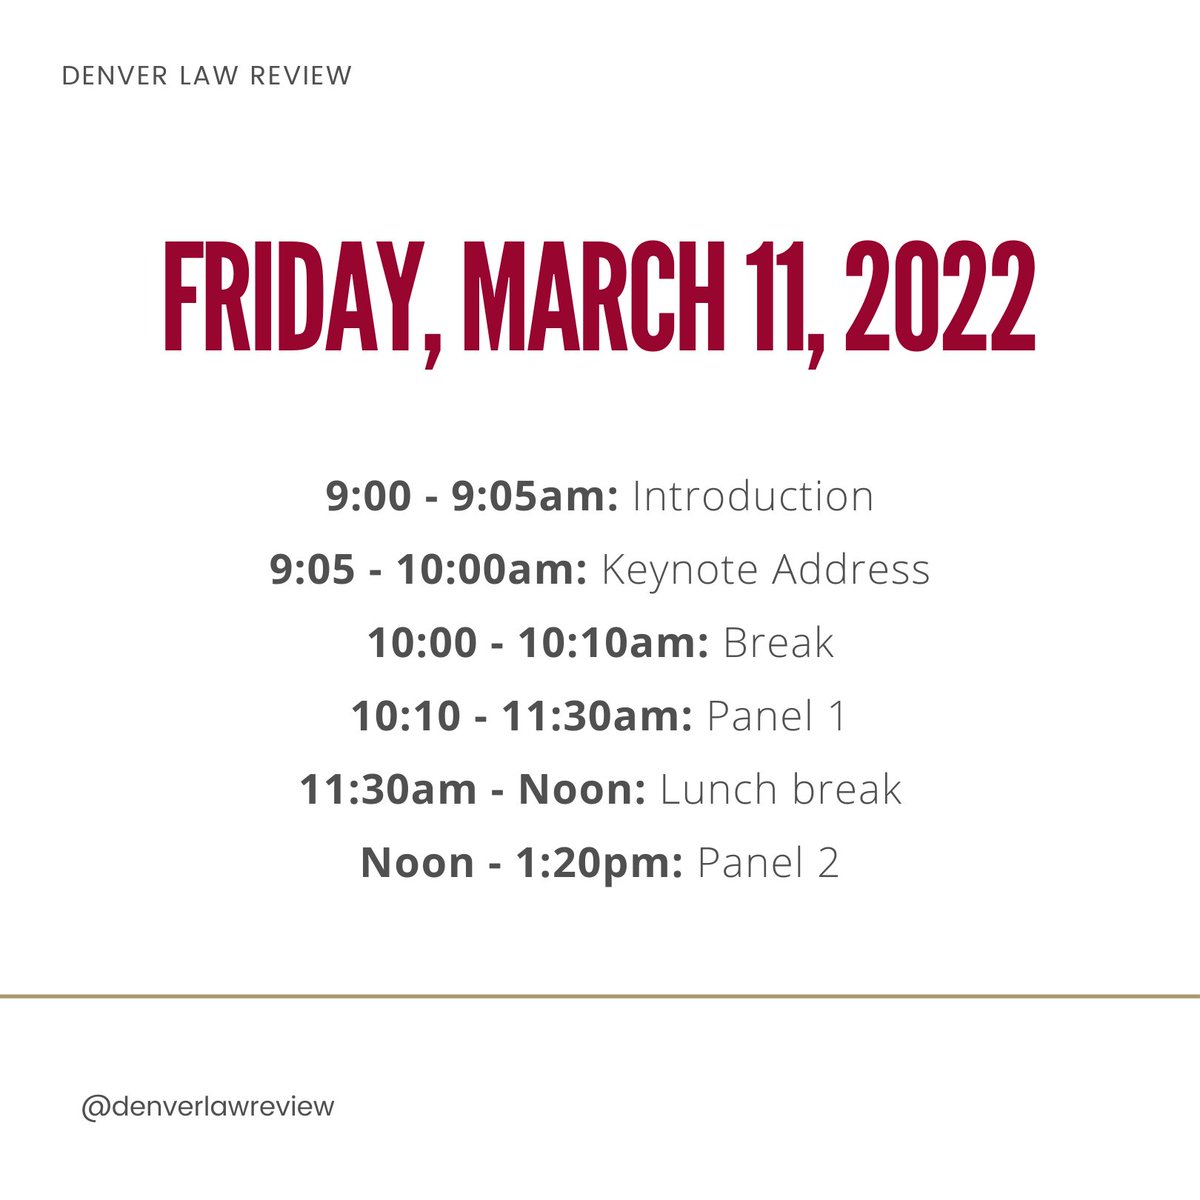 Denver Law Review's 2022 Symposium is only a few days away! Learn more about our distinguished speakers & panelists and register today at dughost.imodules.com/DLRS2022!